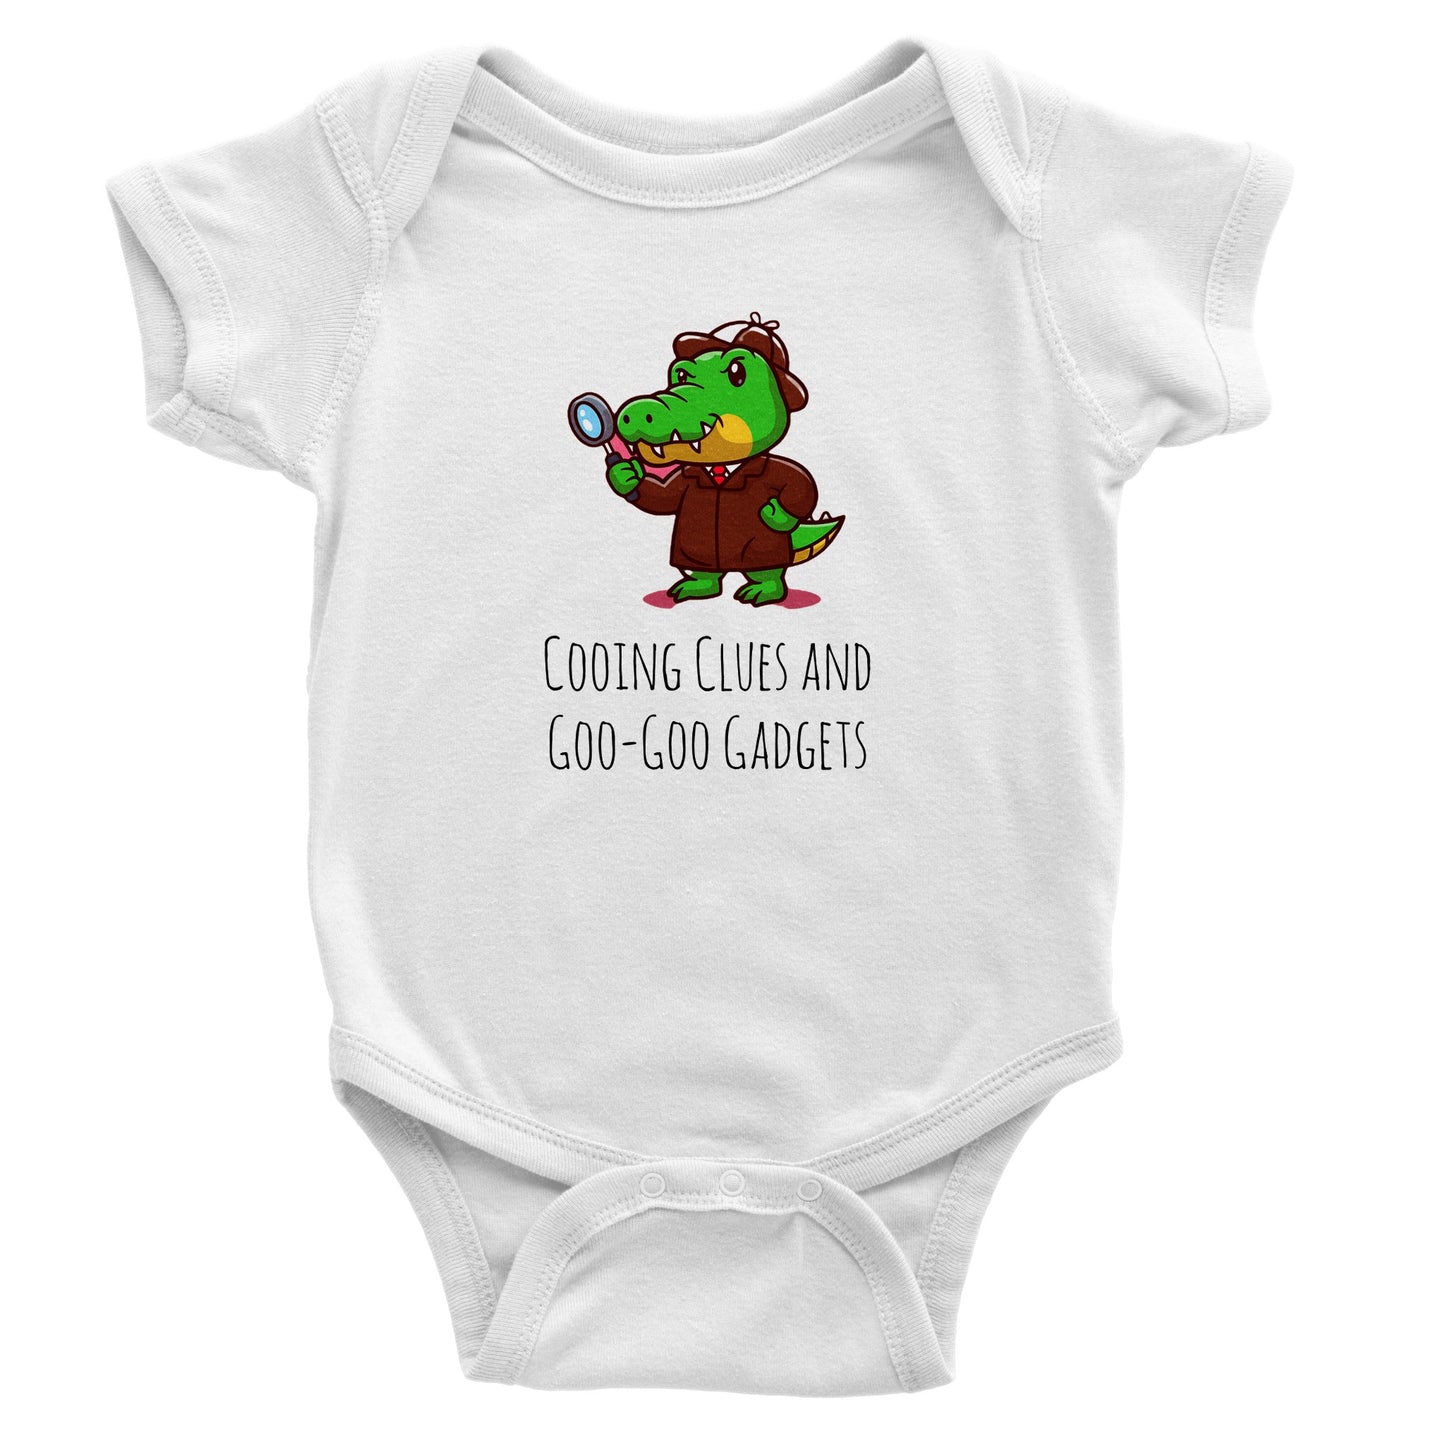 Classic Baby Short Sleeve Bodysuit - Cooing Clues And Goo-Goo Gadgets